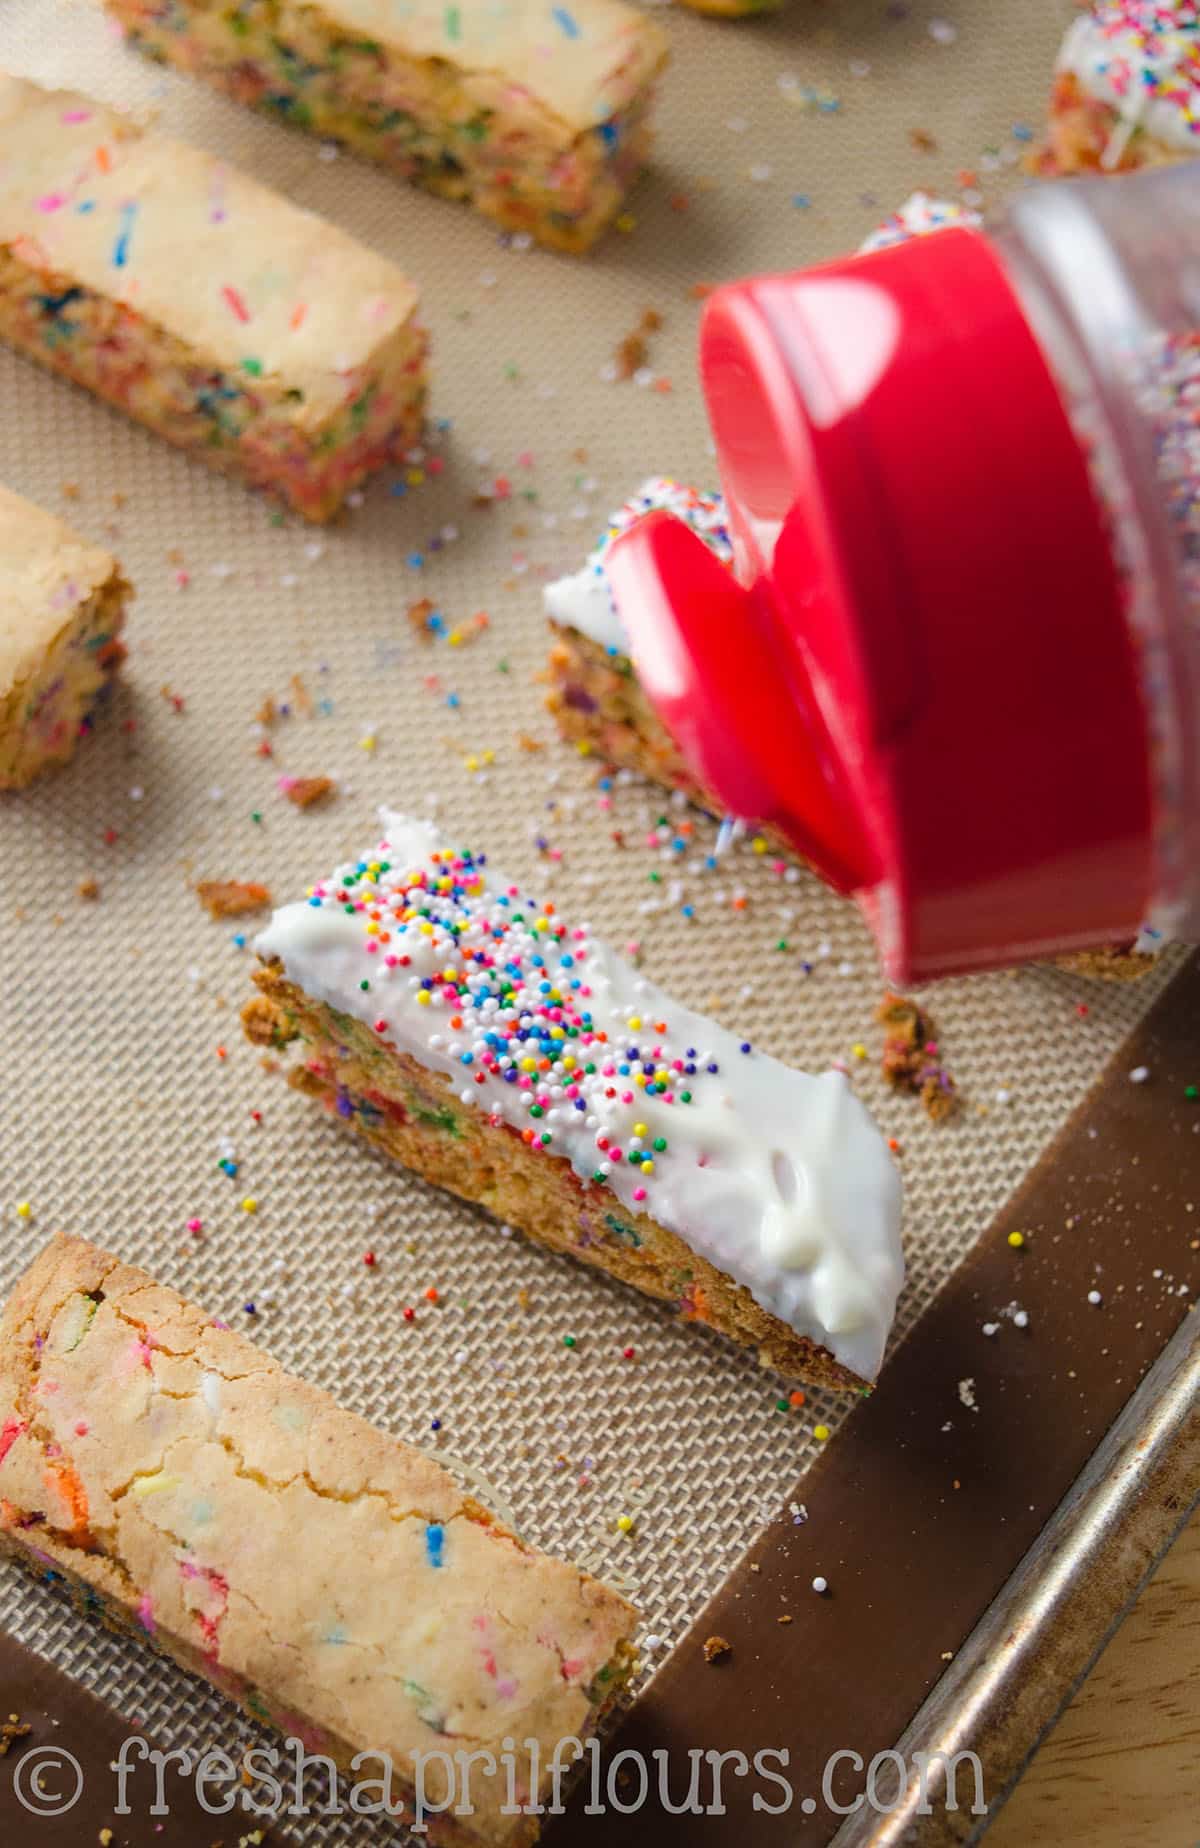 Funfetti biscotti on a baking sheet. Someone is sprinkling nonpareil sprinkles onto them.